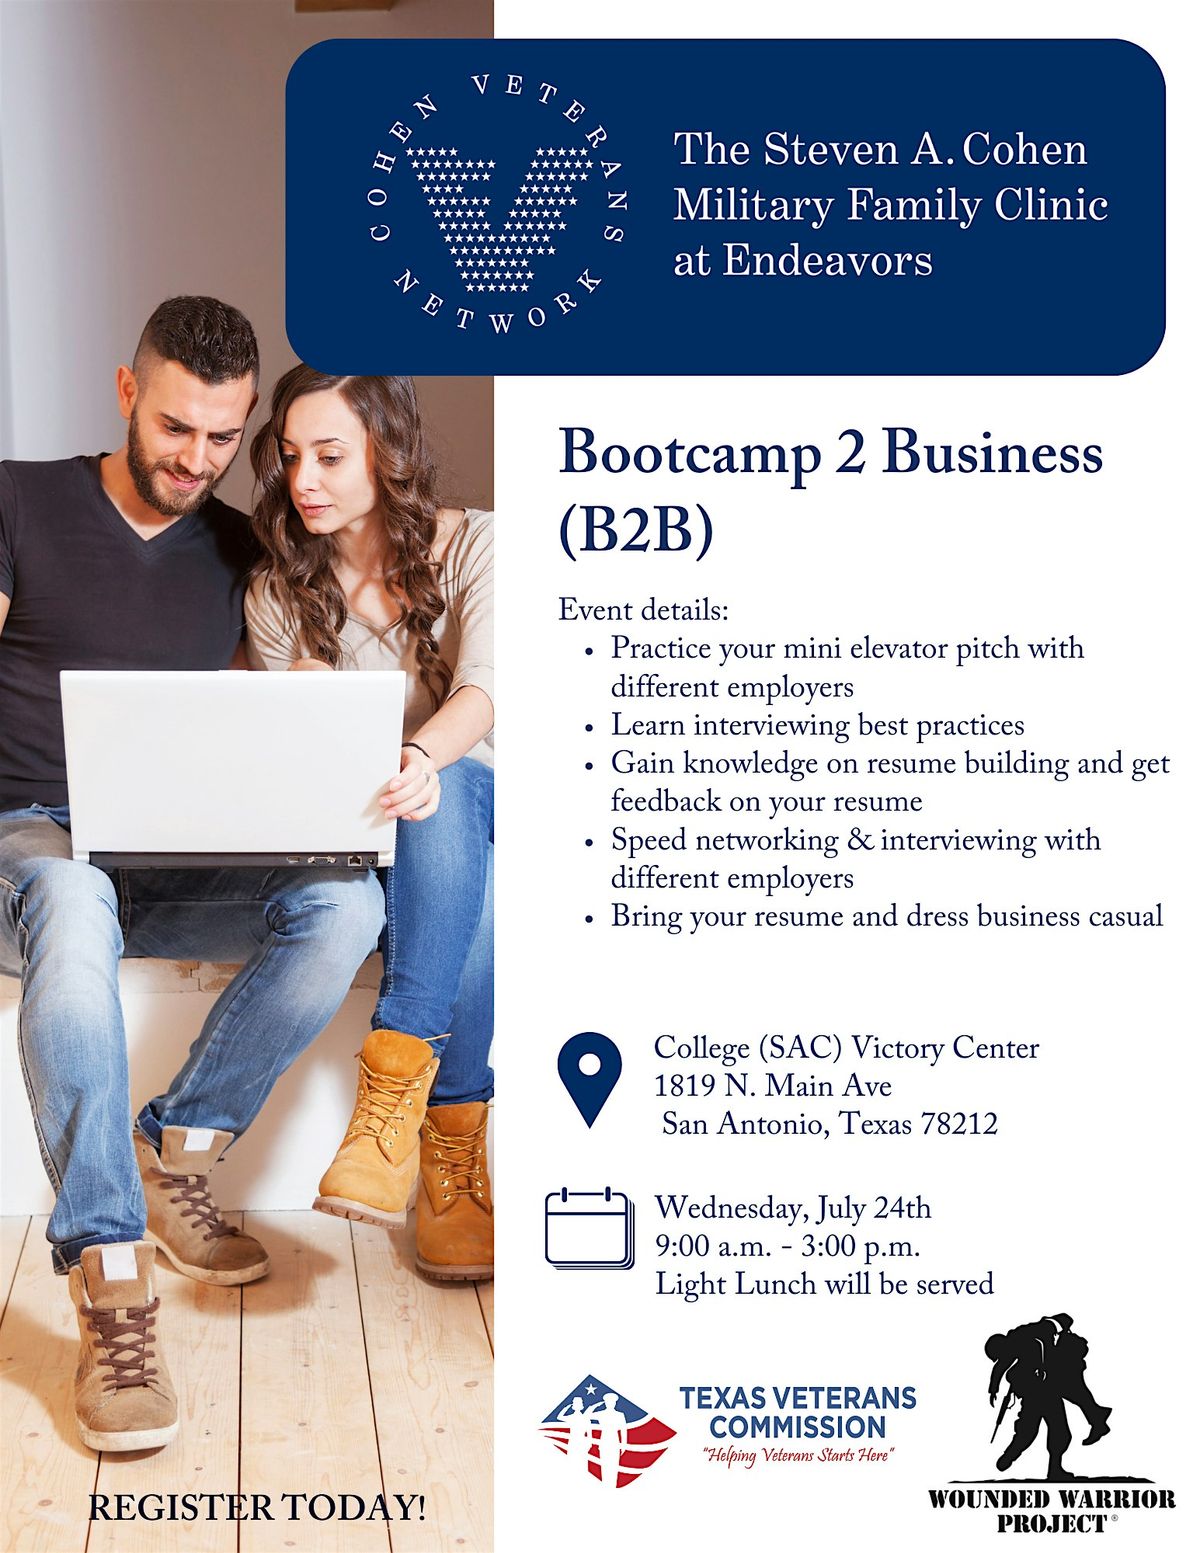 Bootcamp 2 Business